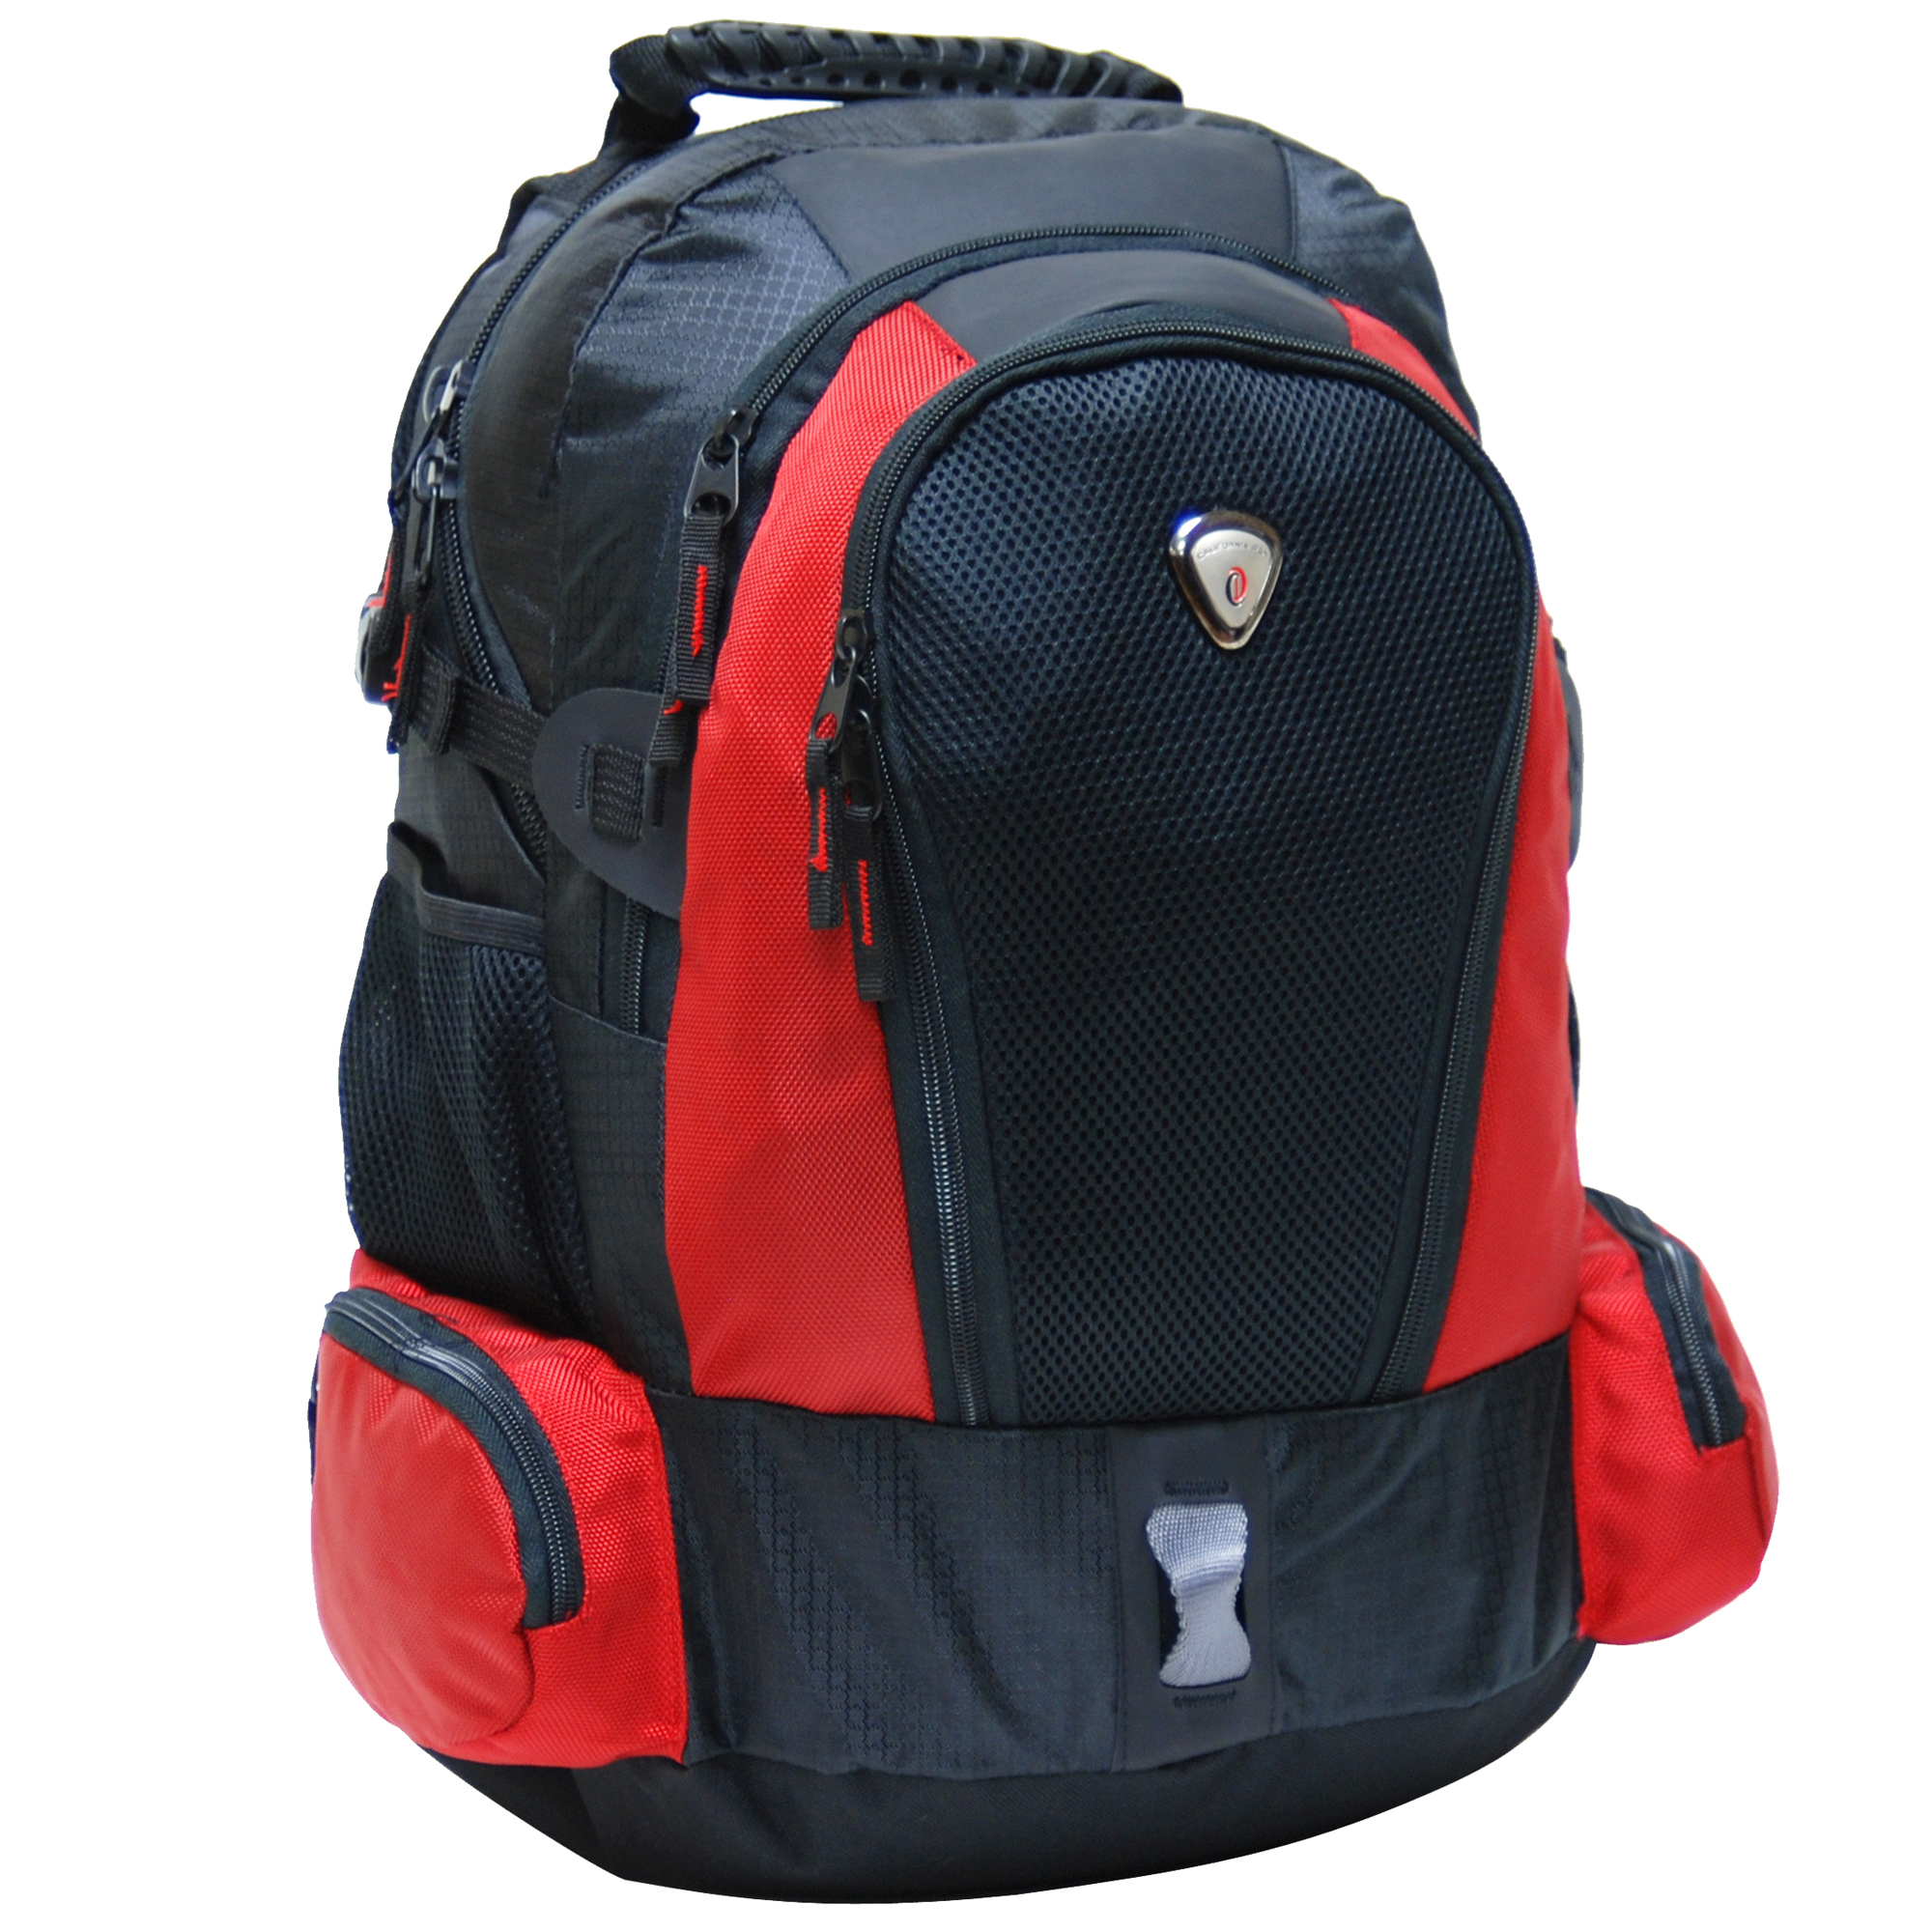 18" Backpack With Buckle System